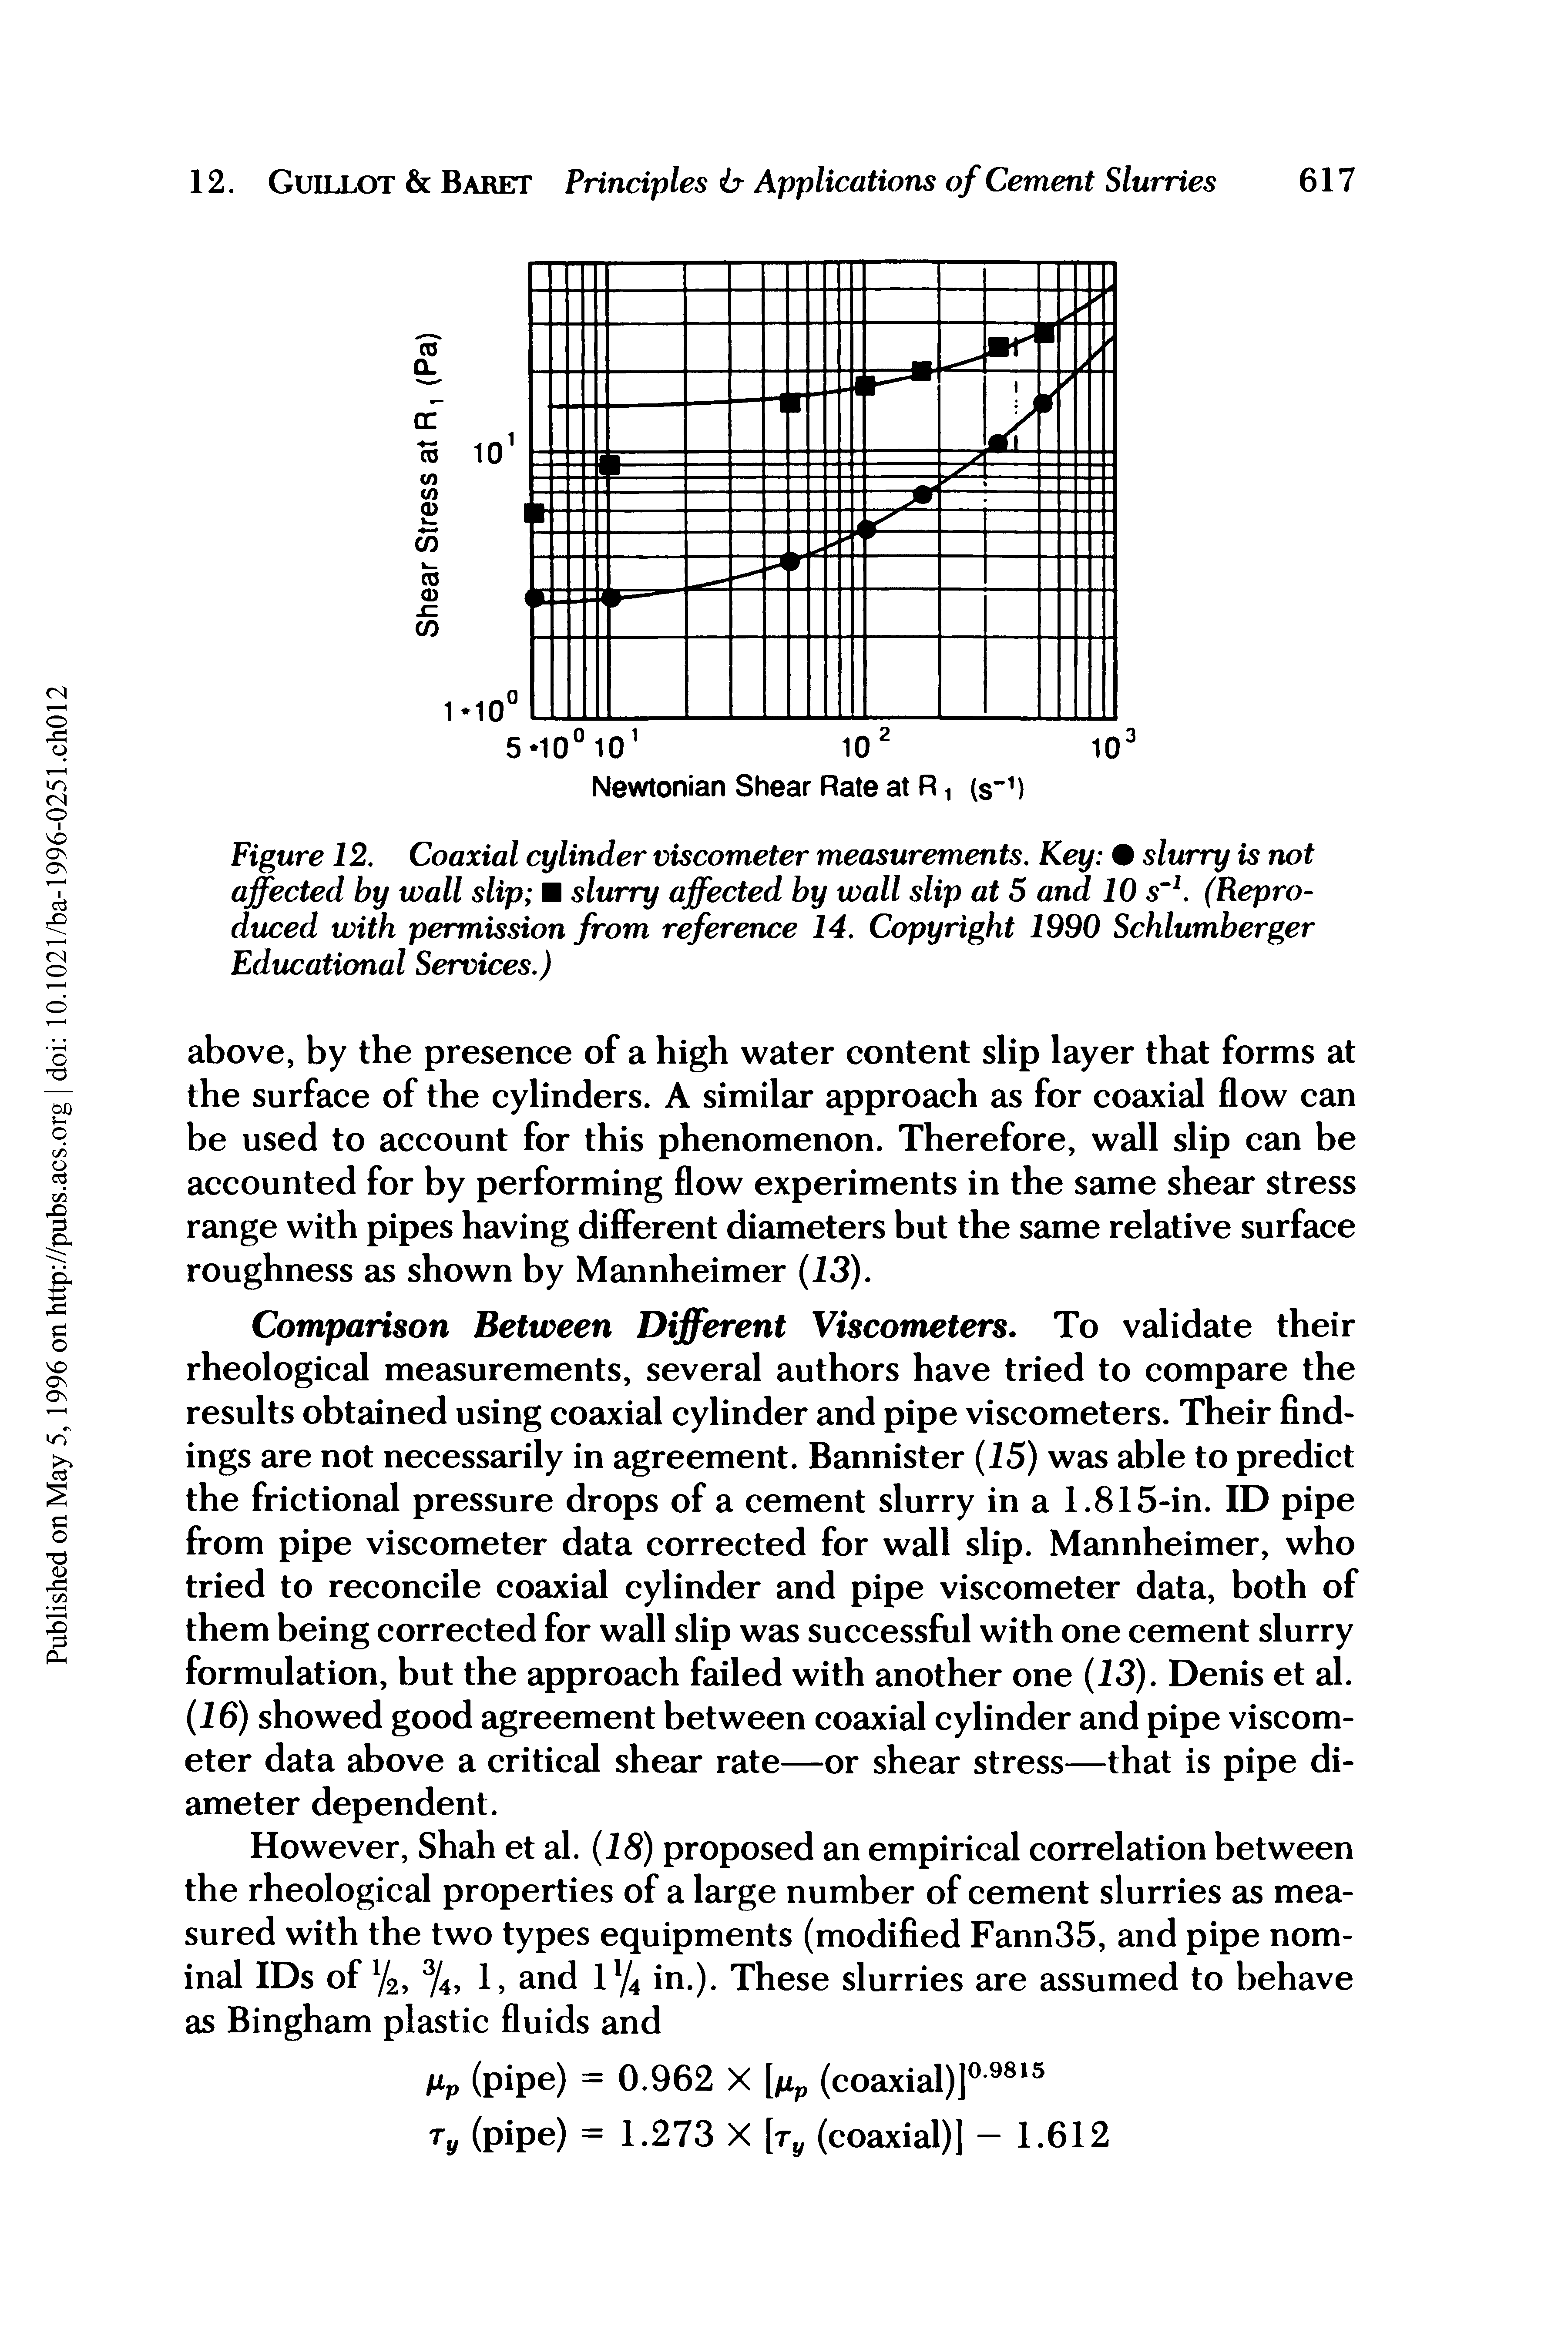 Figure 12. Coaxial cylinder viscometer measurements. Key slurry is not affected by wall slip slurry affected by wall slip at 5 and 10 s 1. (Reproduced with permission from reference 14. Copyright 1990 Schlumberger Educational Services.)...